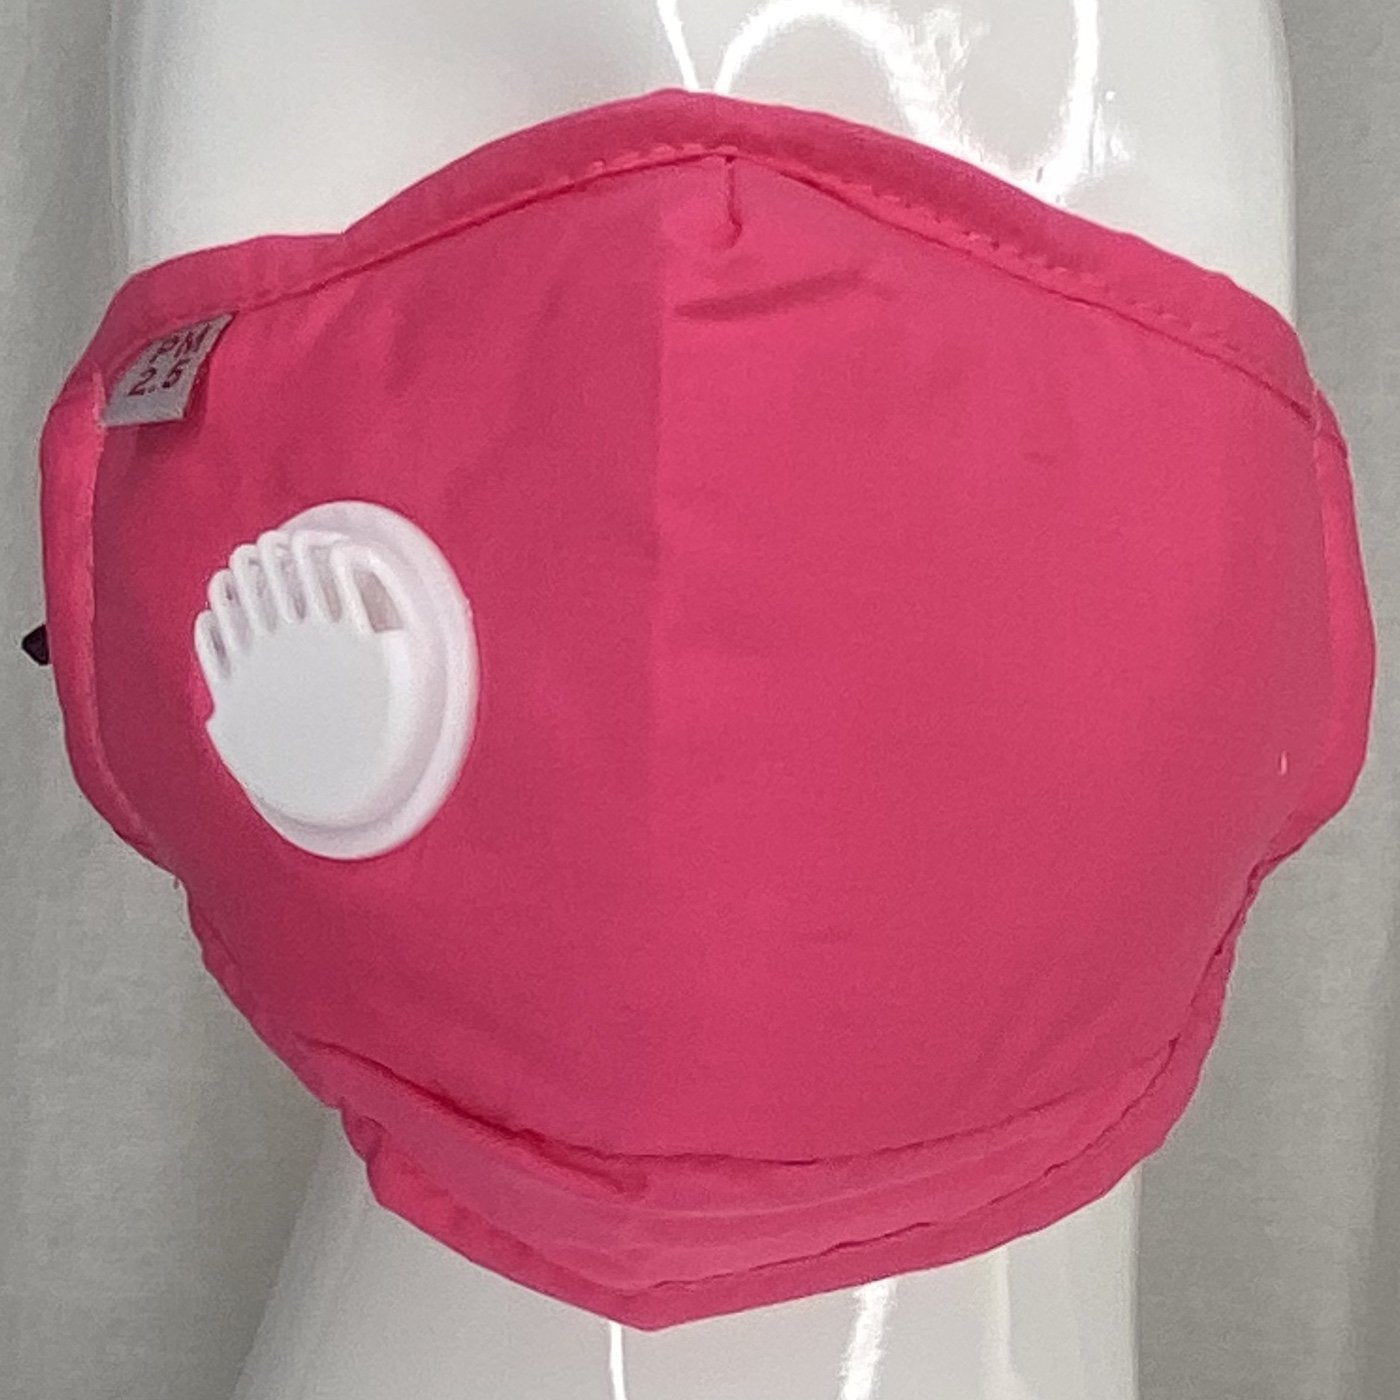 Respirator PM 2.5 Mask With Filter Pocket And 2 Filters (Hot Pink) In Stock-Boughie Curves-Boughie